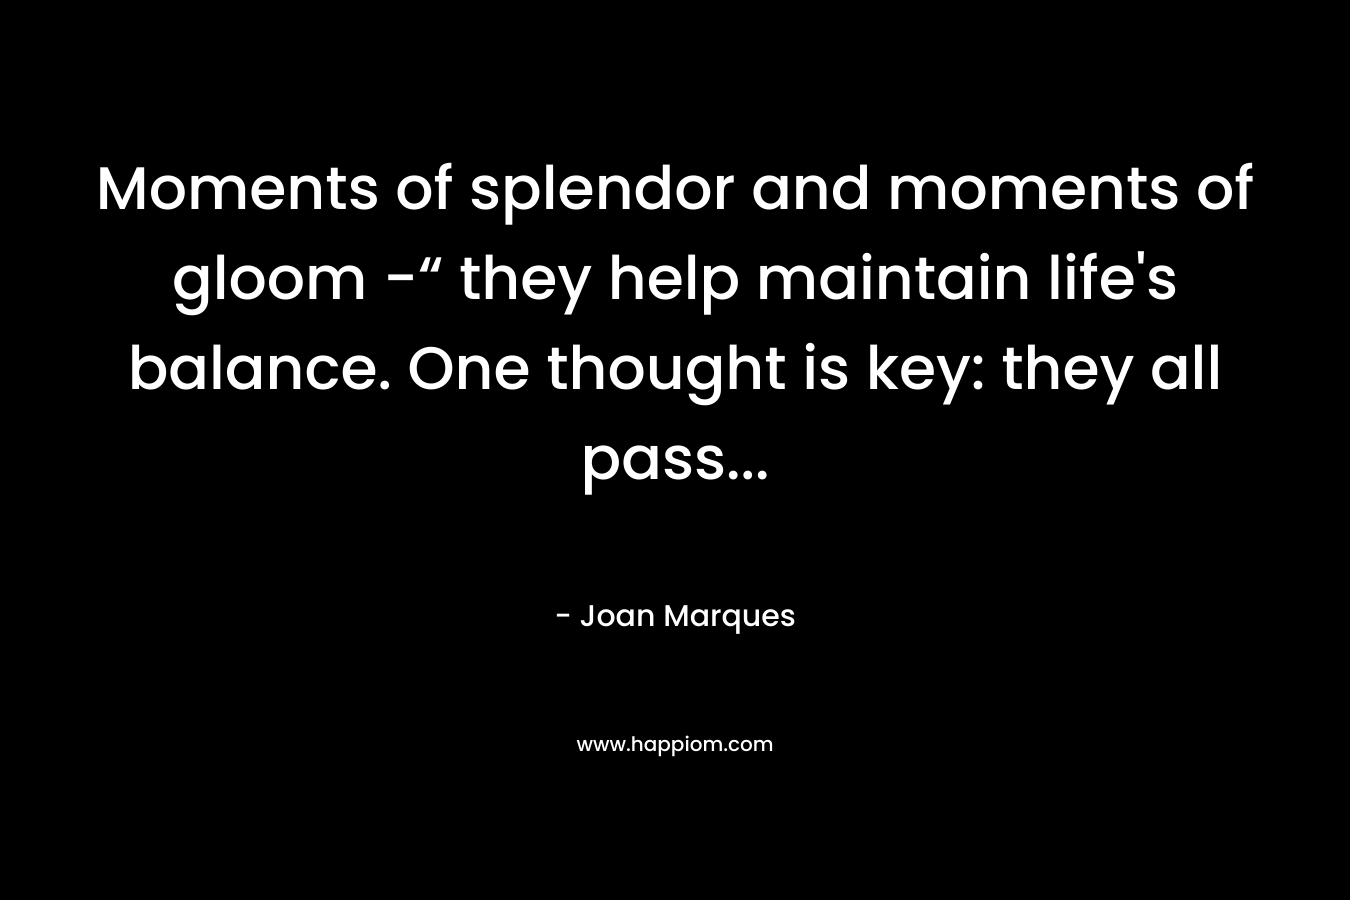 Moments of splendor and moments of gloom -“ they help maintain life's balance. One thought is key: they all pass...